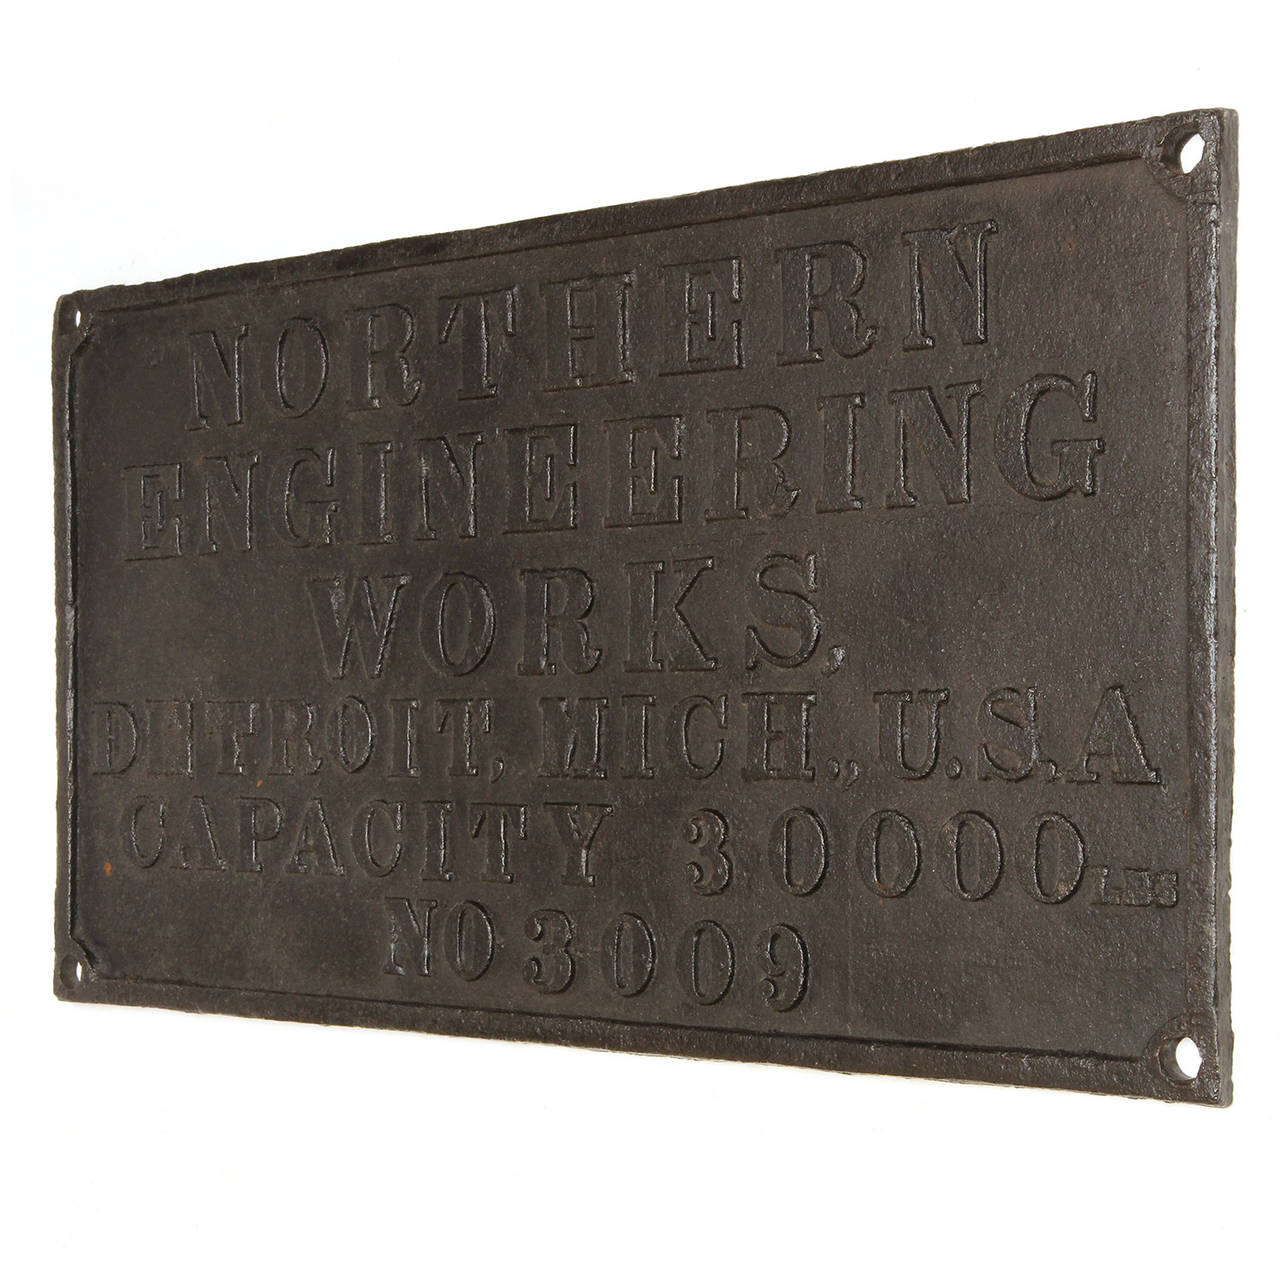 A graphic rectangular patinated steel wall sign from a venerable Detroit, Michigan engineering firm.